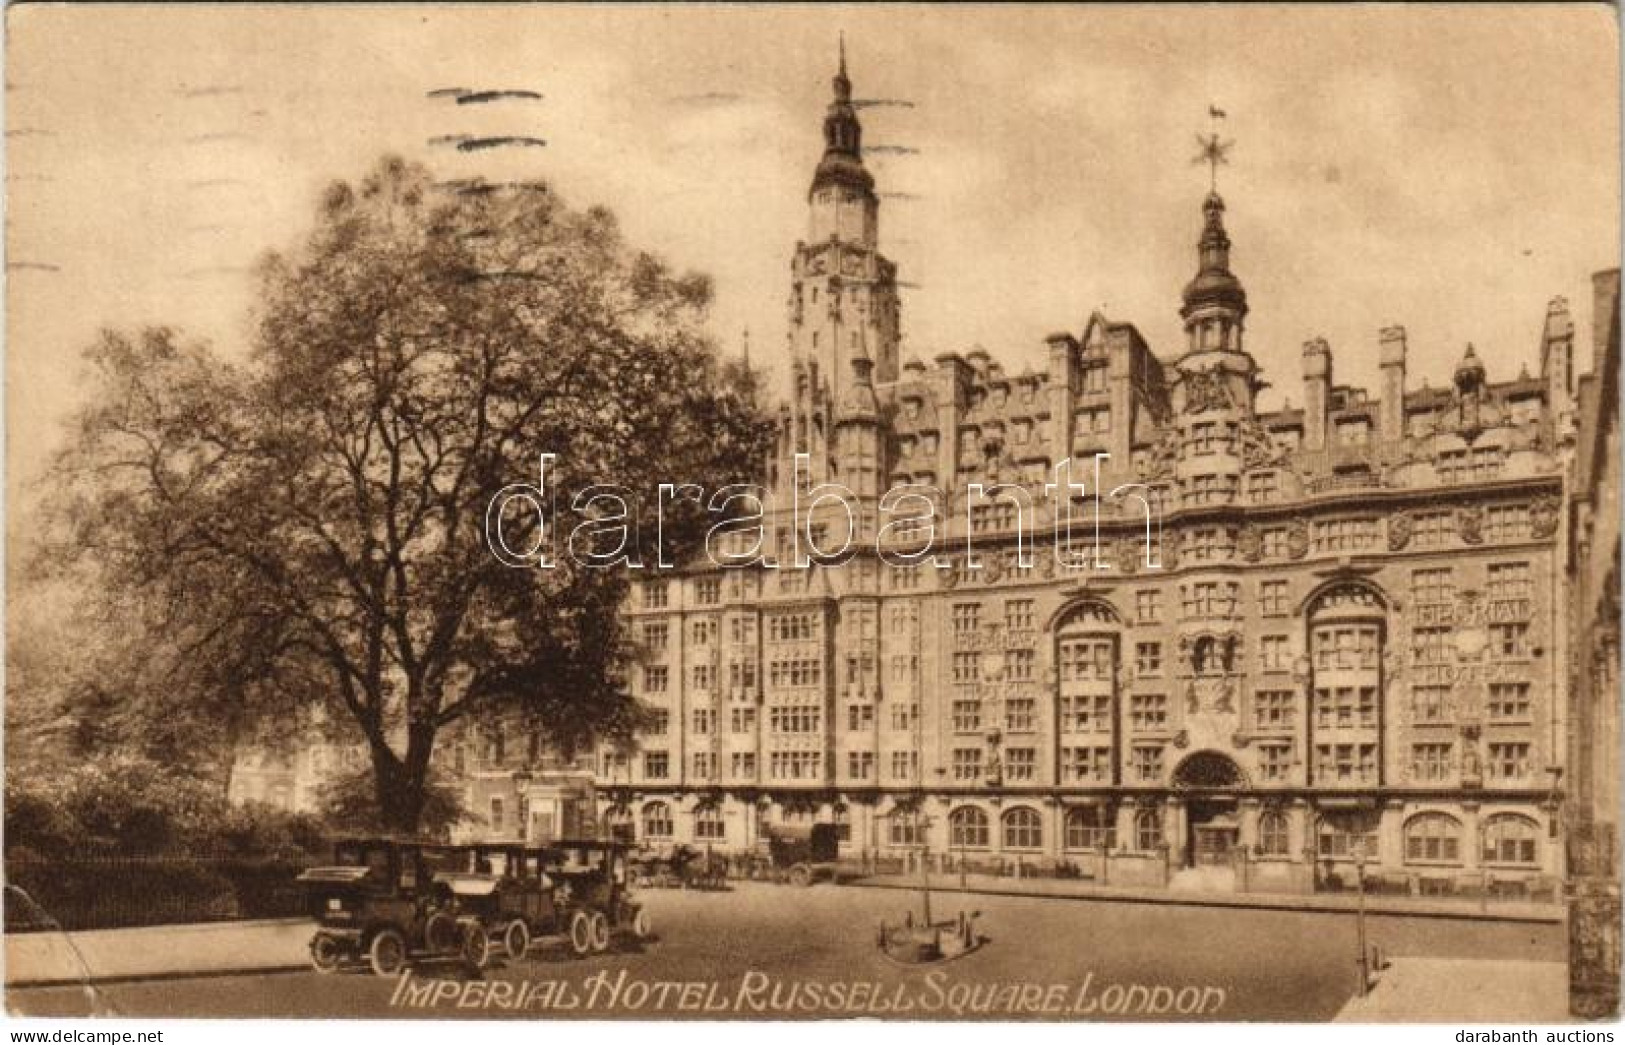 T2/T3 1924 London, Imperial Hotel, Russell Square, Automobiles (EK) - Unclassified